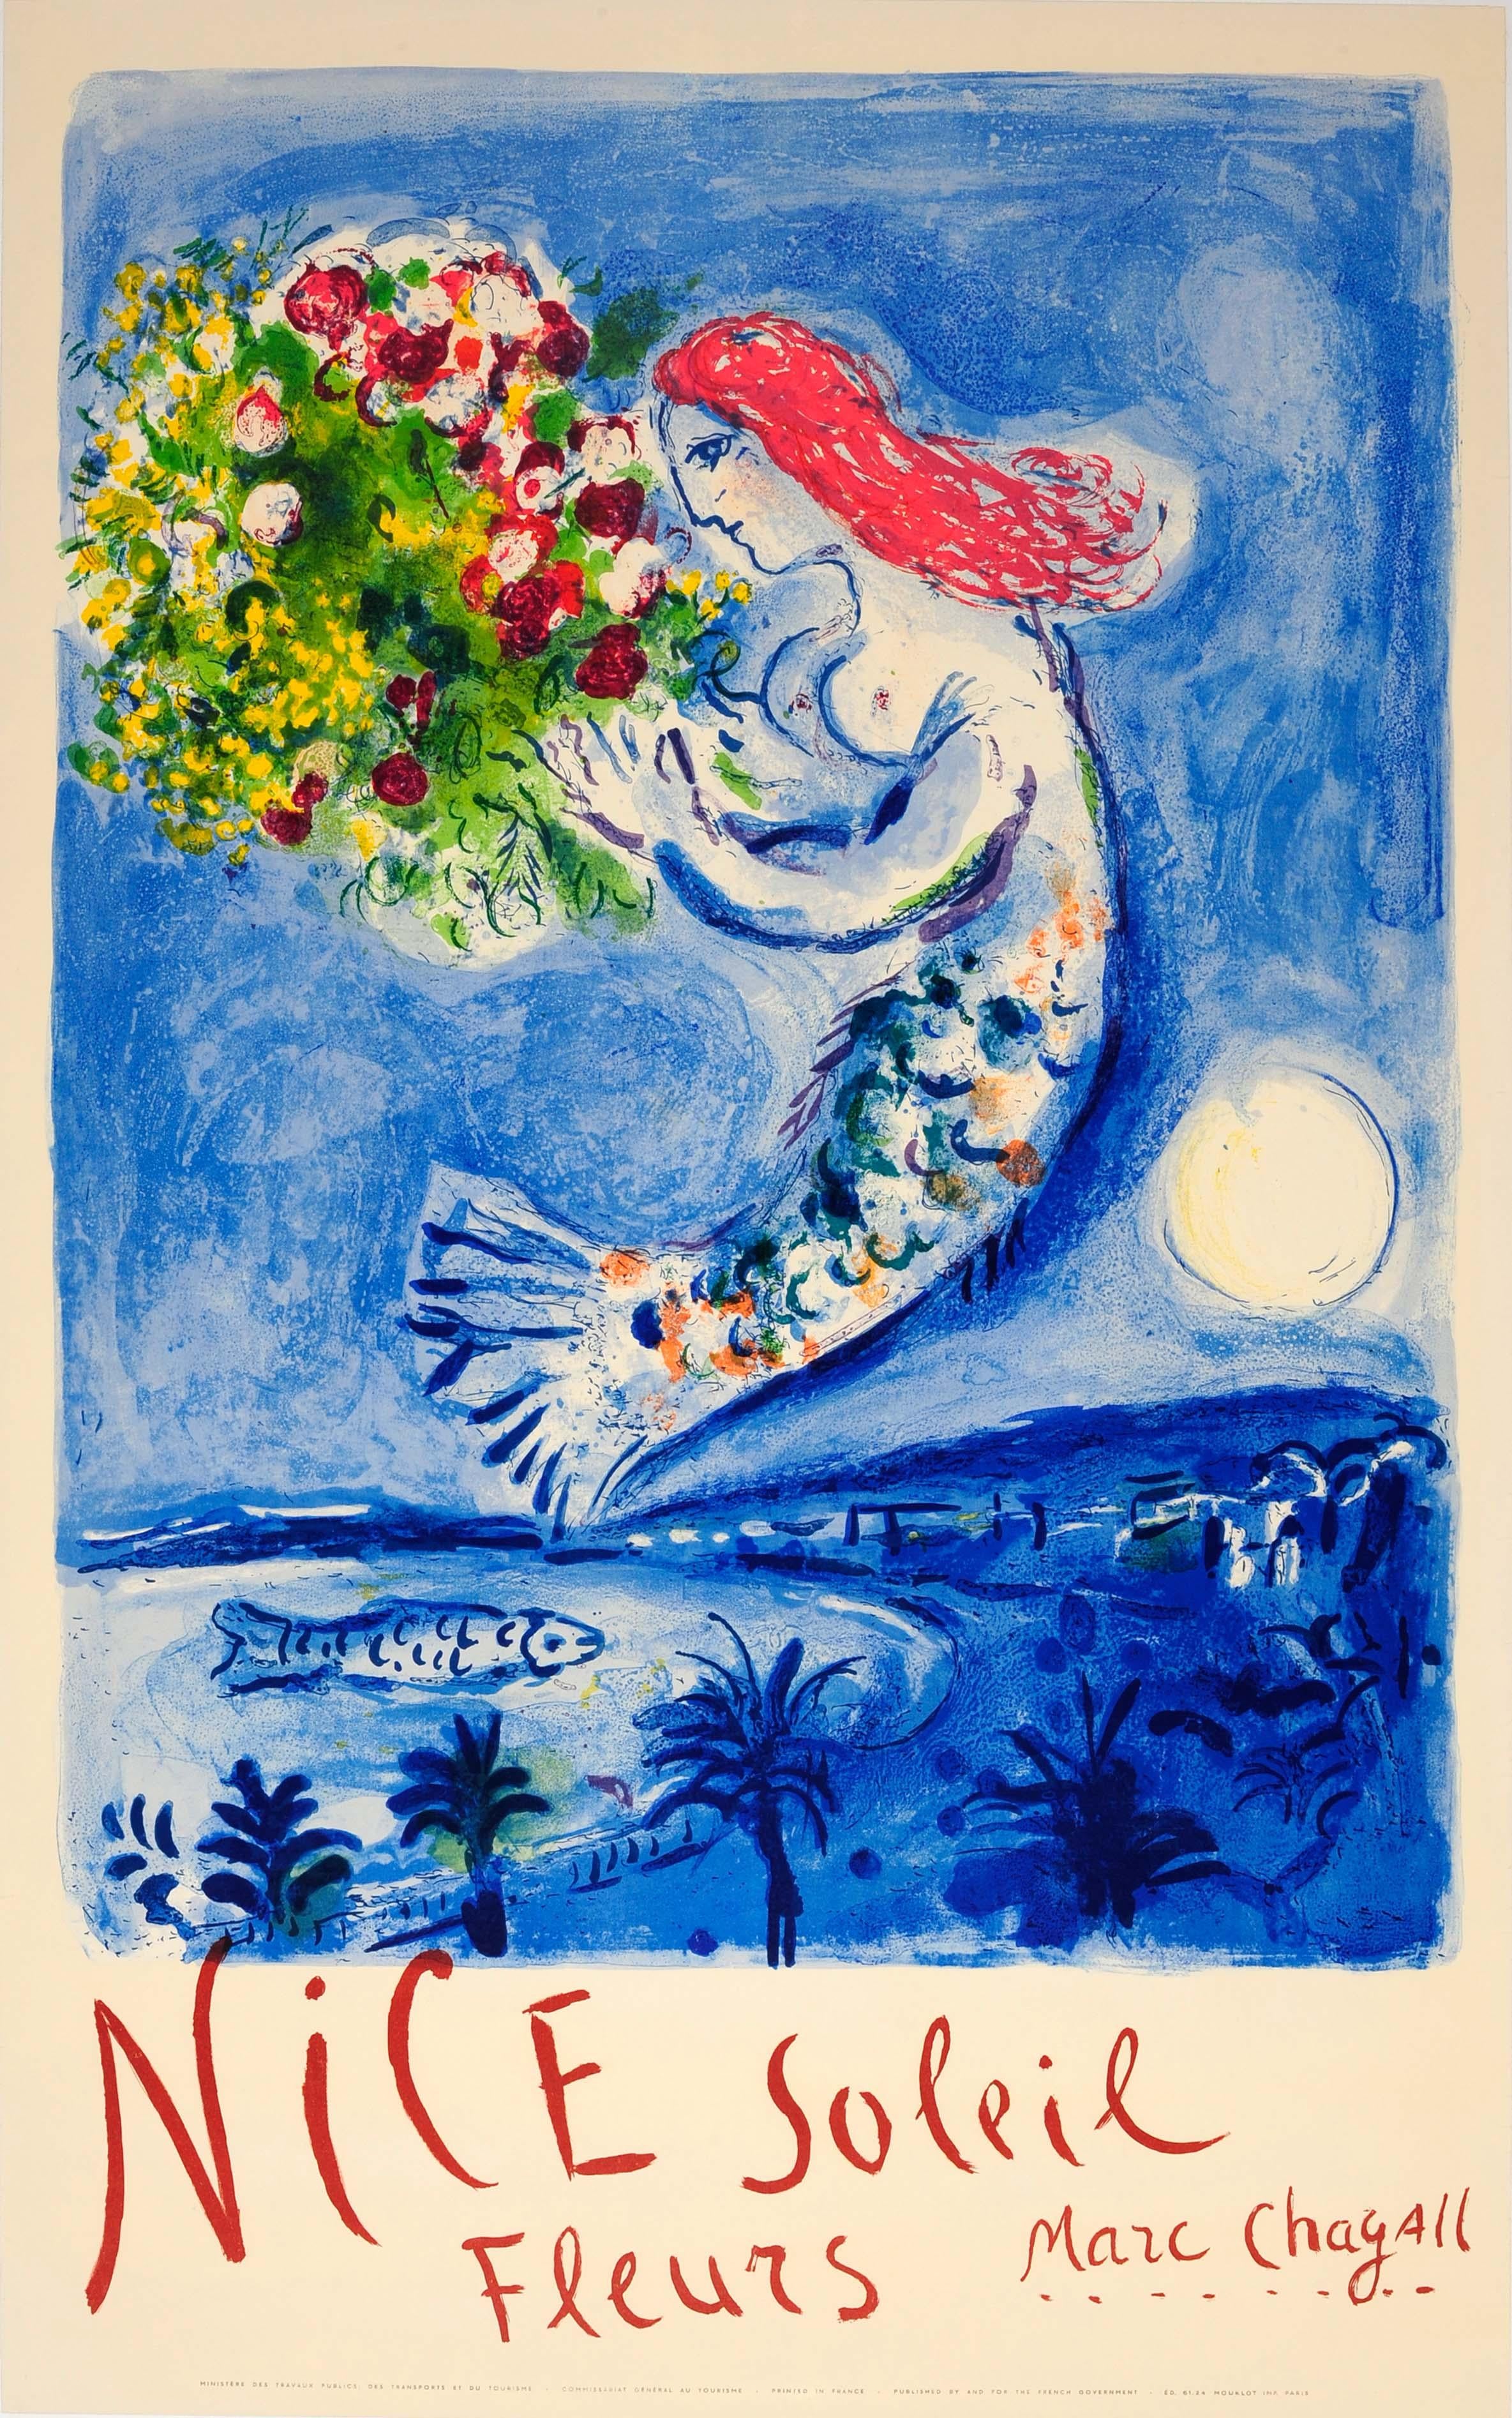 (after) Marc Chagall Print - Original Vintage Travel Poster For Nice Soleil Fleurs Marc Chagall Sun Flowers